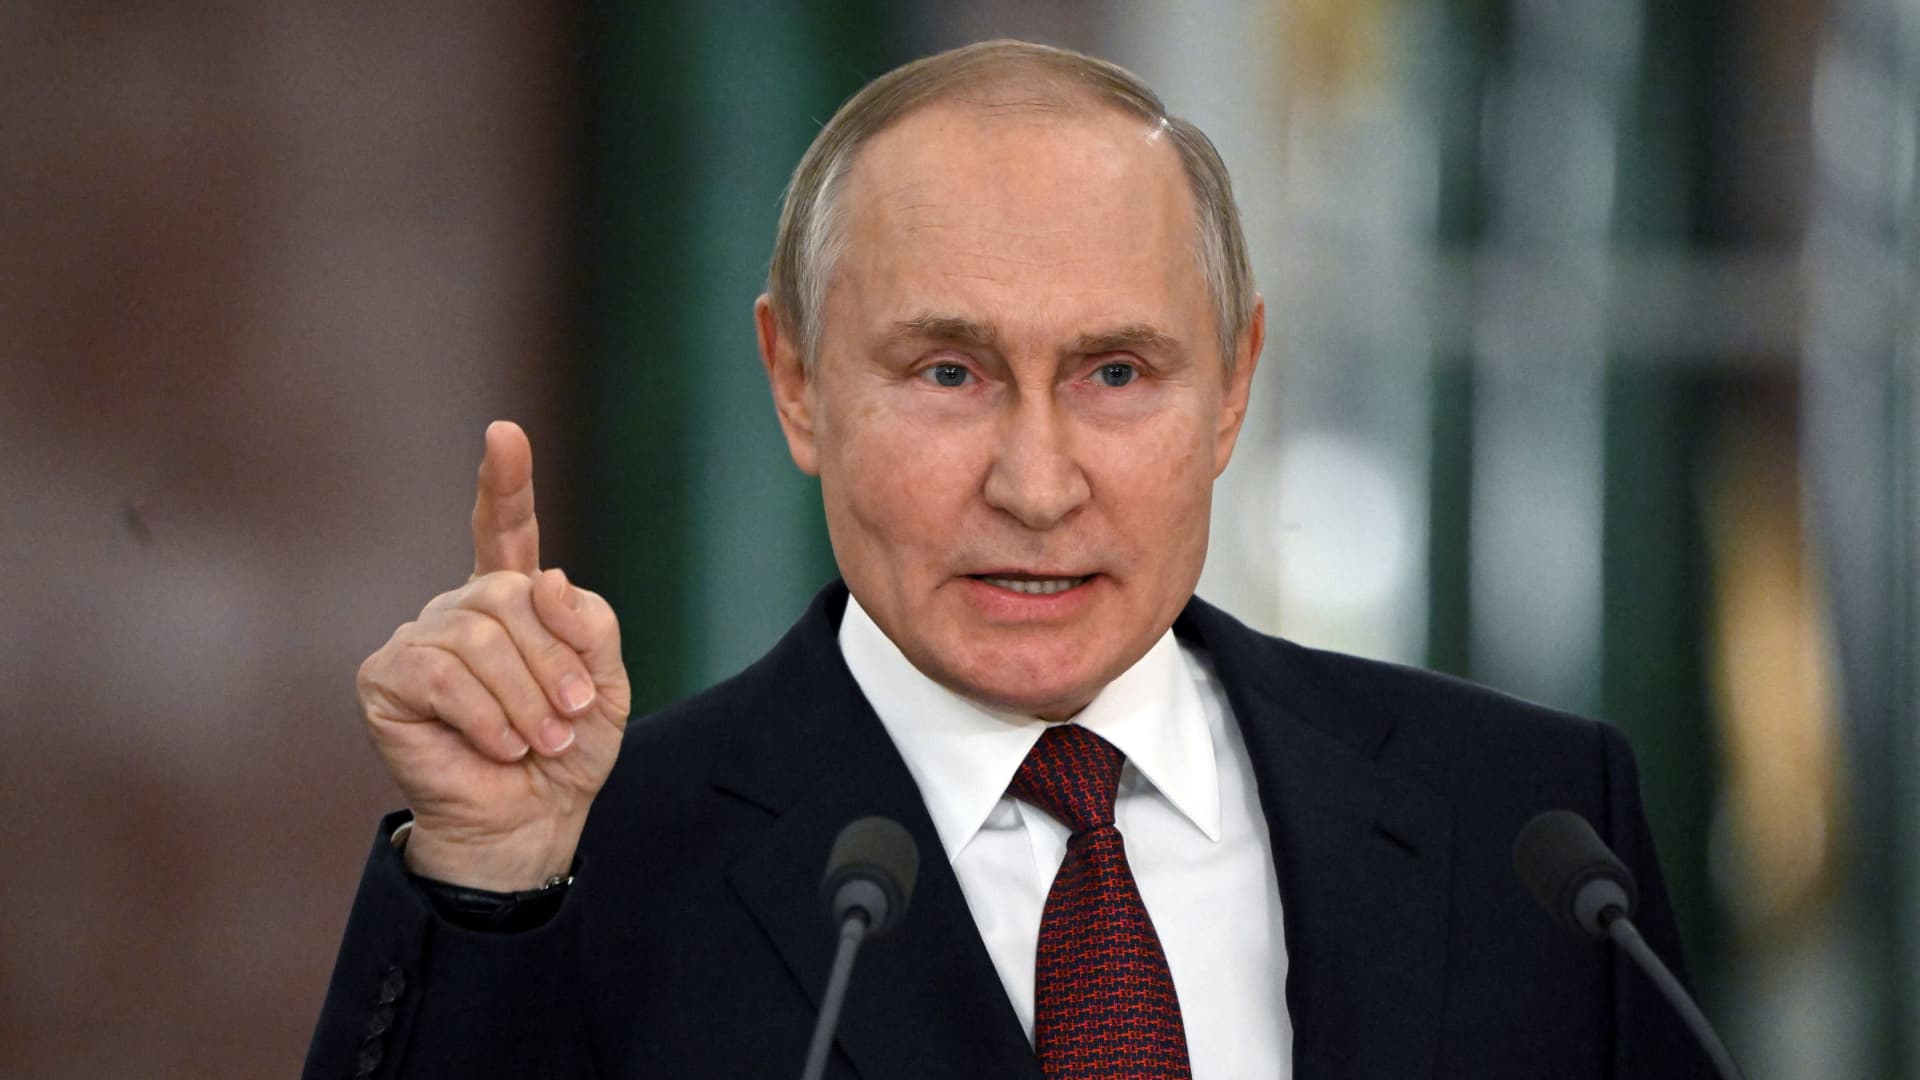 Putin attempts to undermine oil price cap as global energy markets fracture